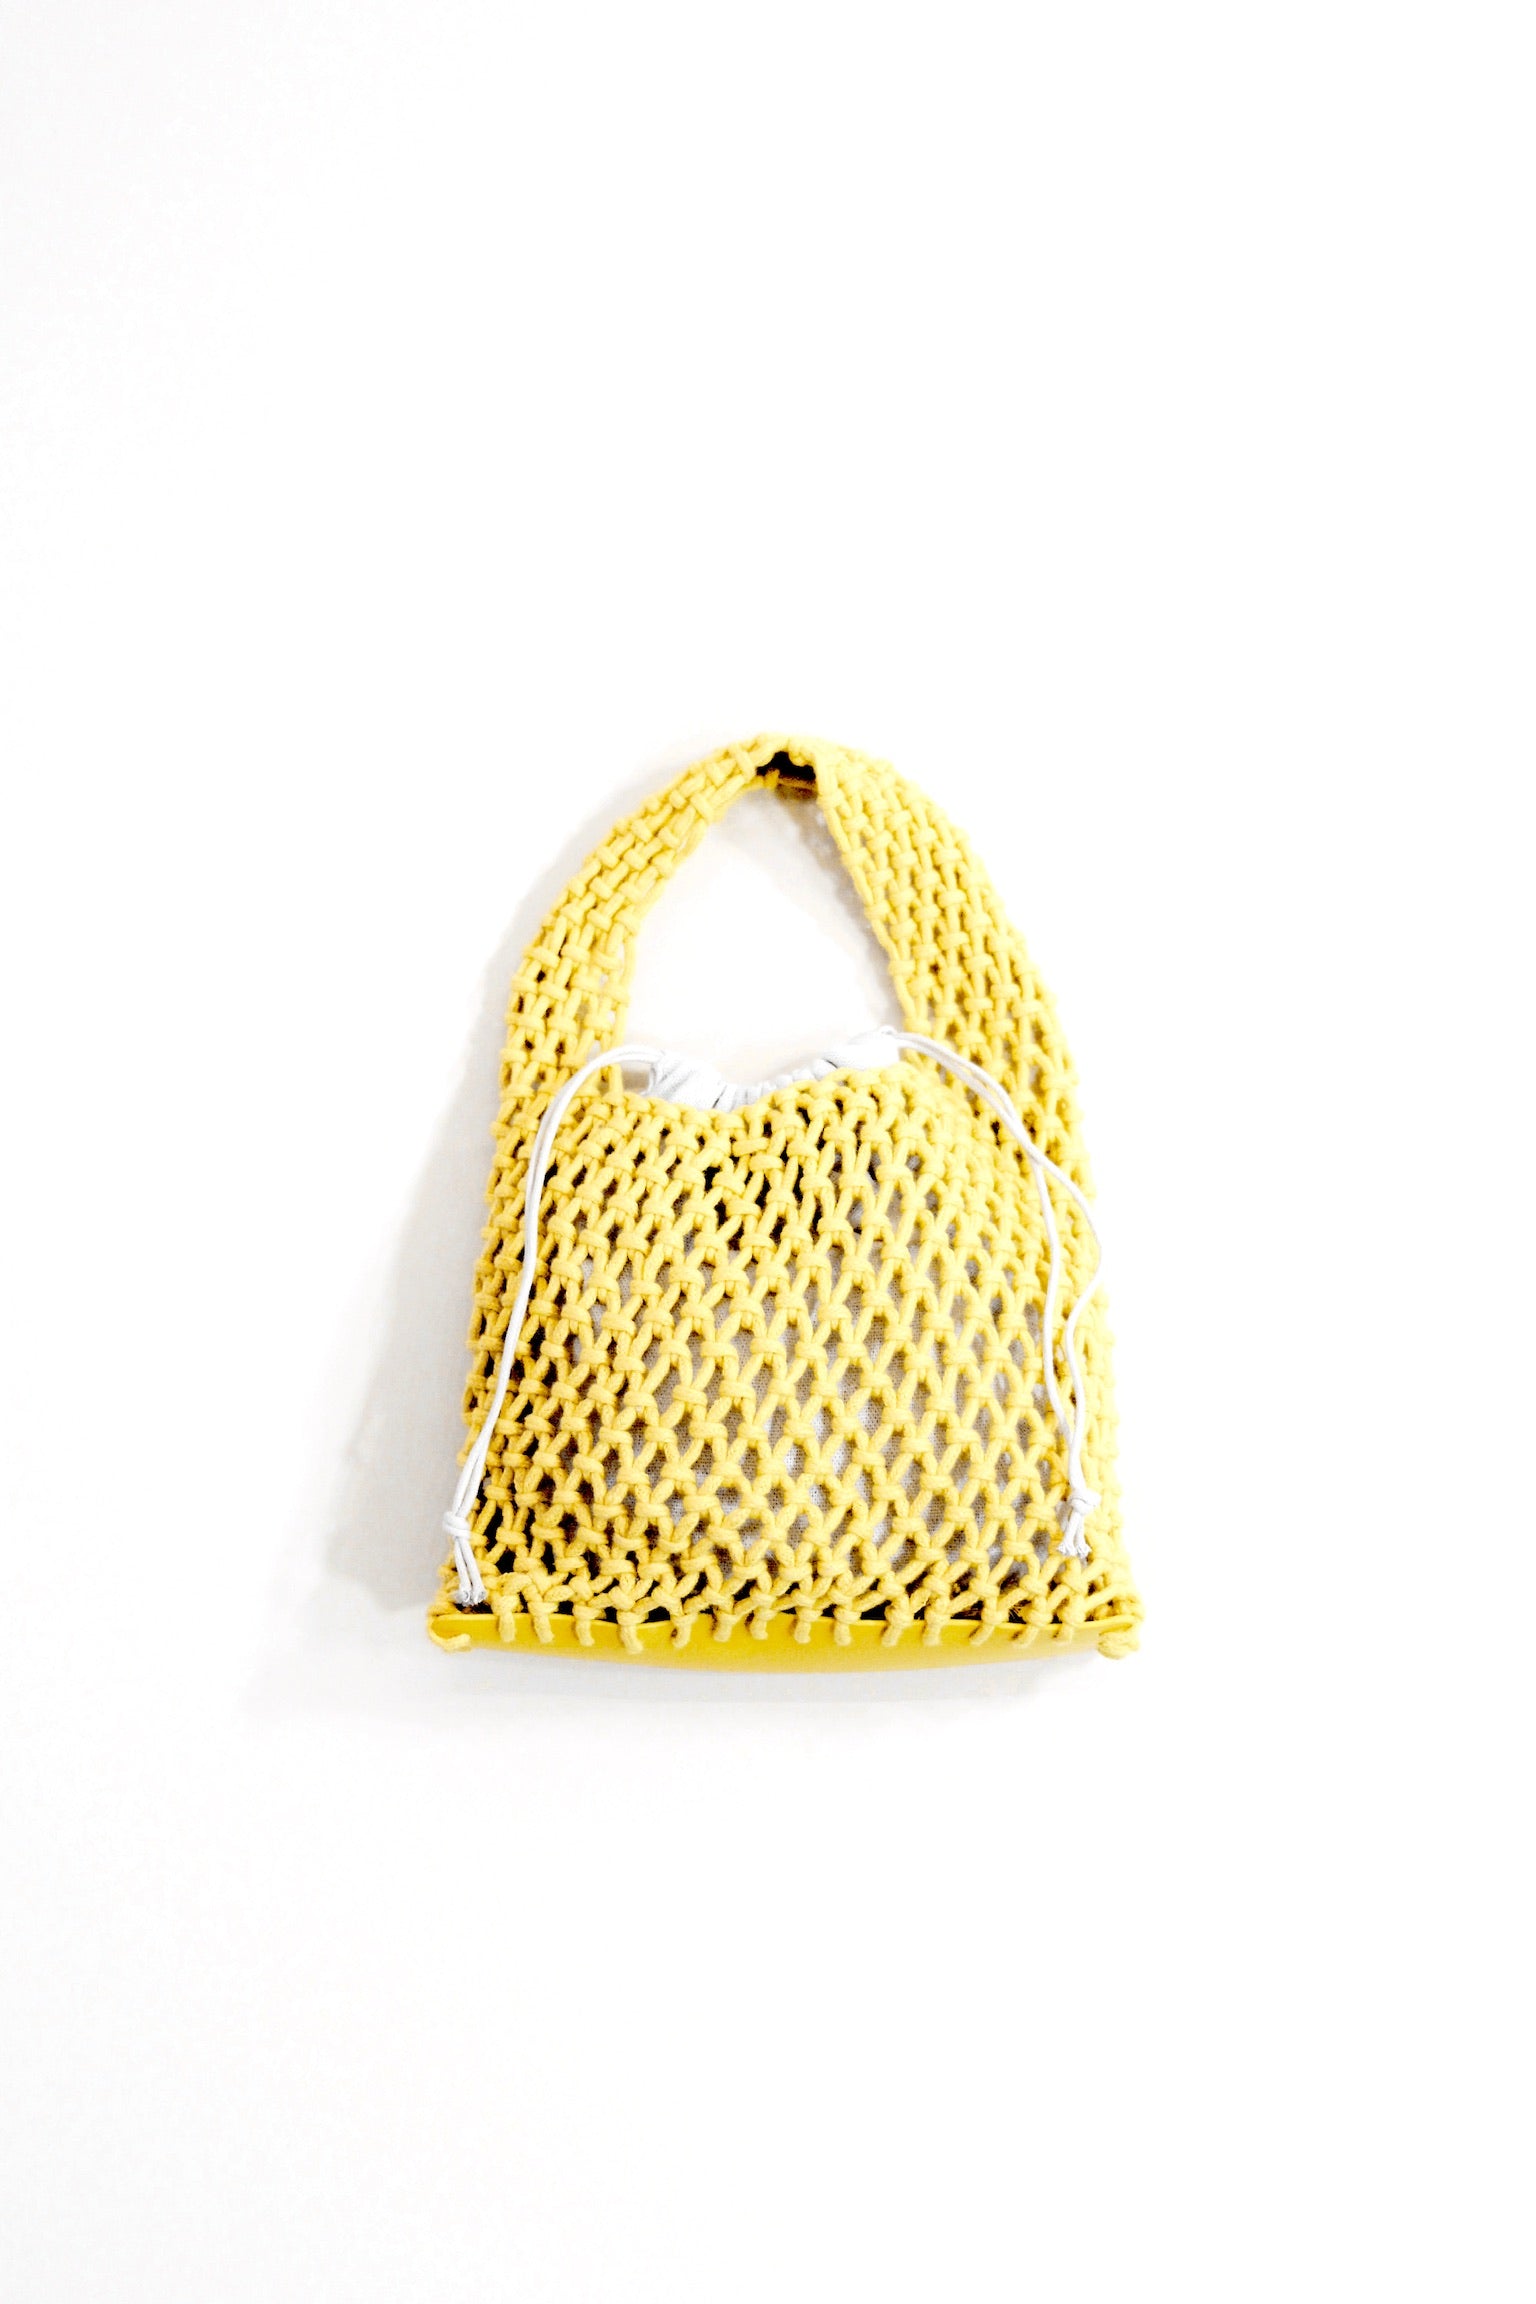 Yellow Crochet Woven Mesh Bag | Collective Request 